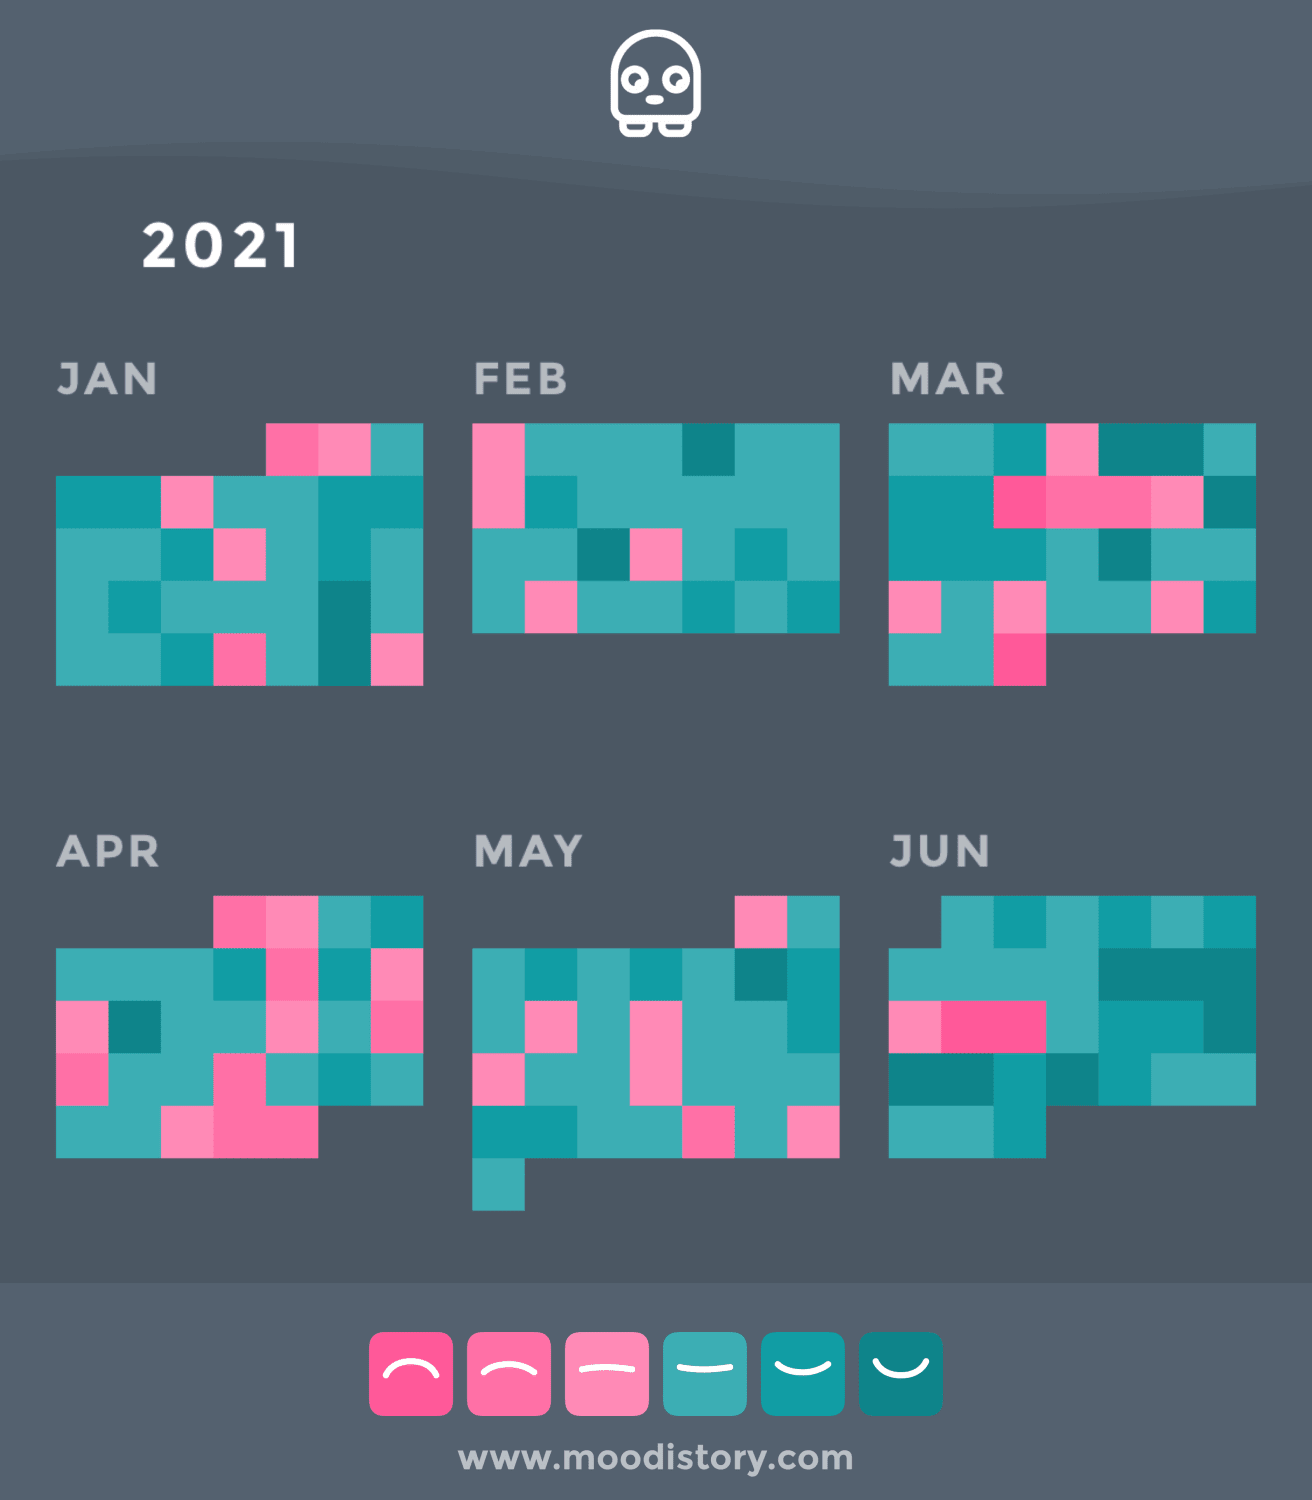 Tracking my mood for half a year